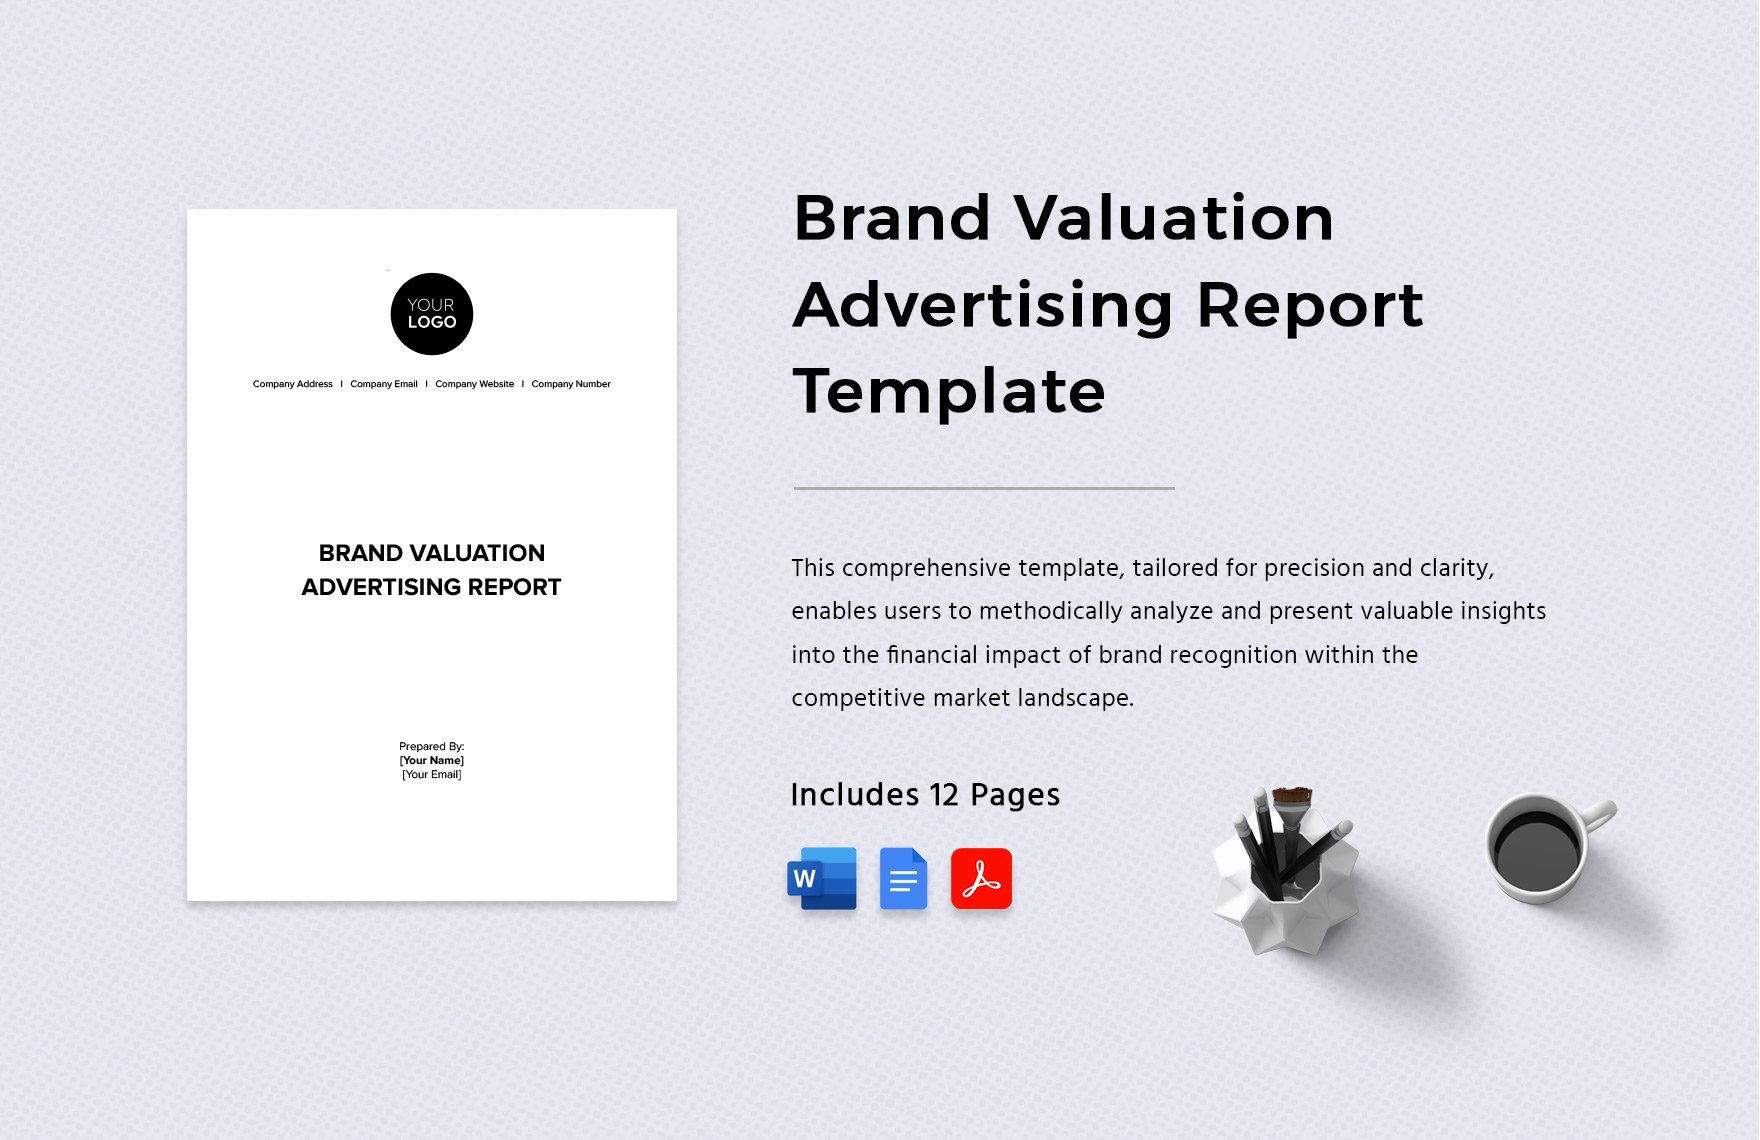 Brand Valuation Advertising Report Template in Word, Google Docs, PDF